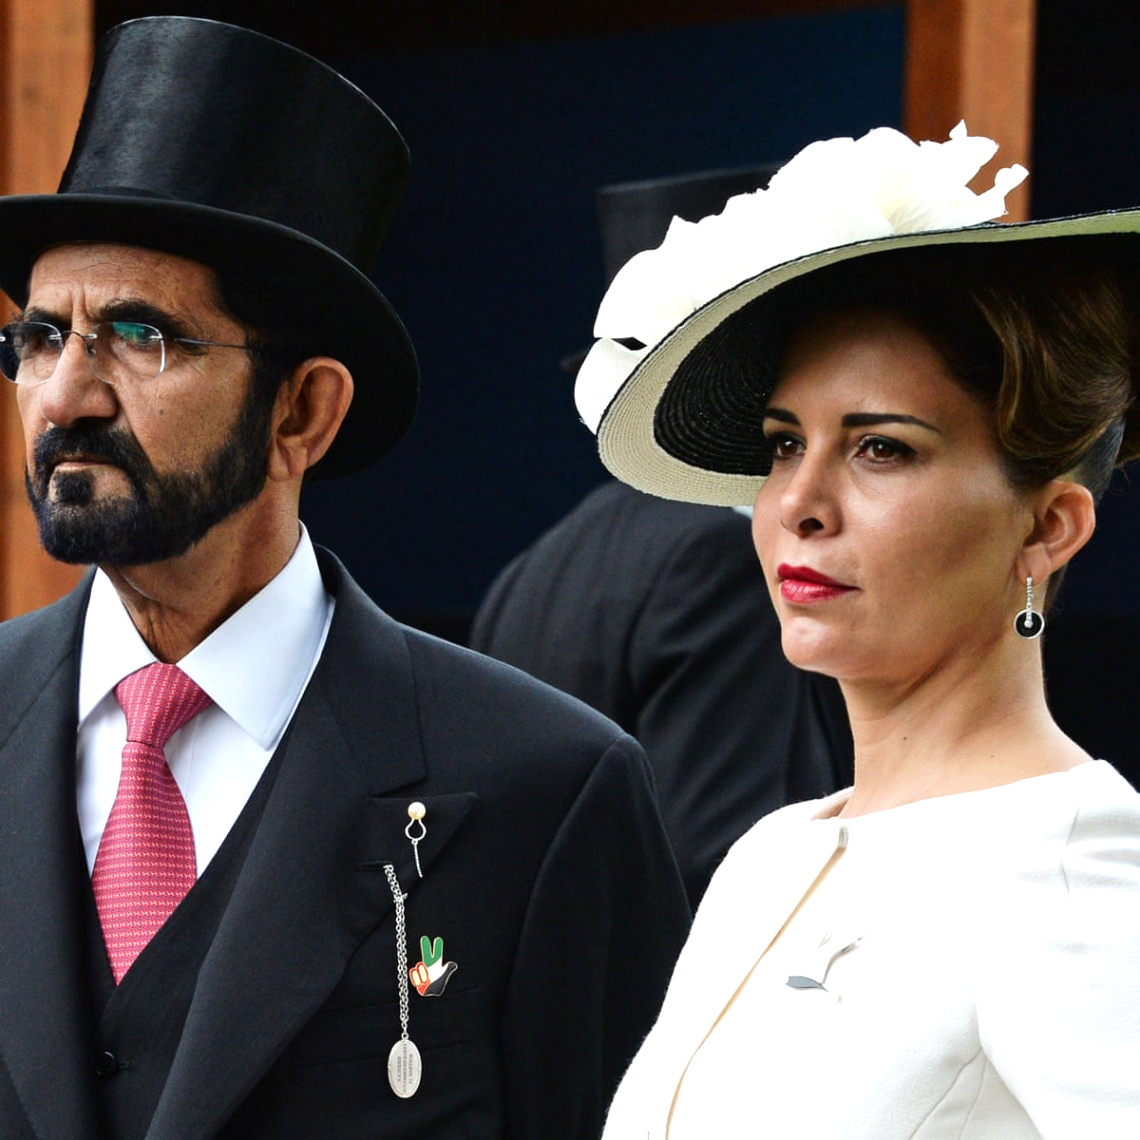 ruler of dubai ordered to pay divorce settlement that could exceed 500m